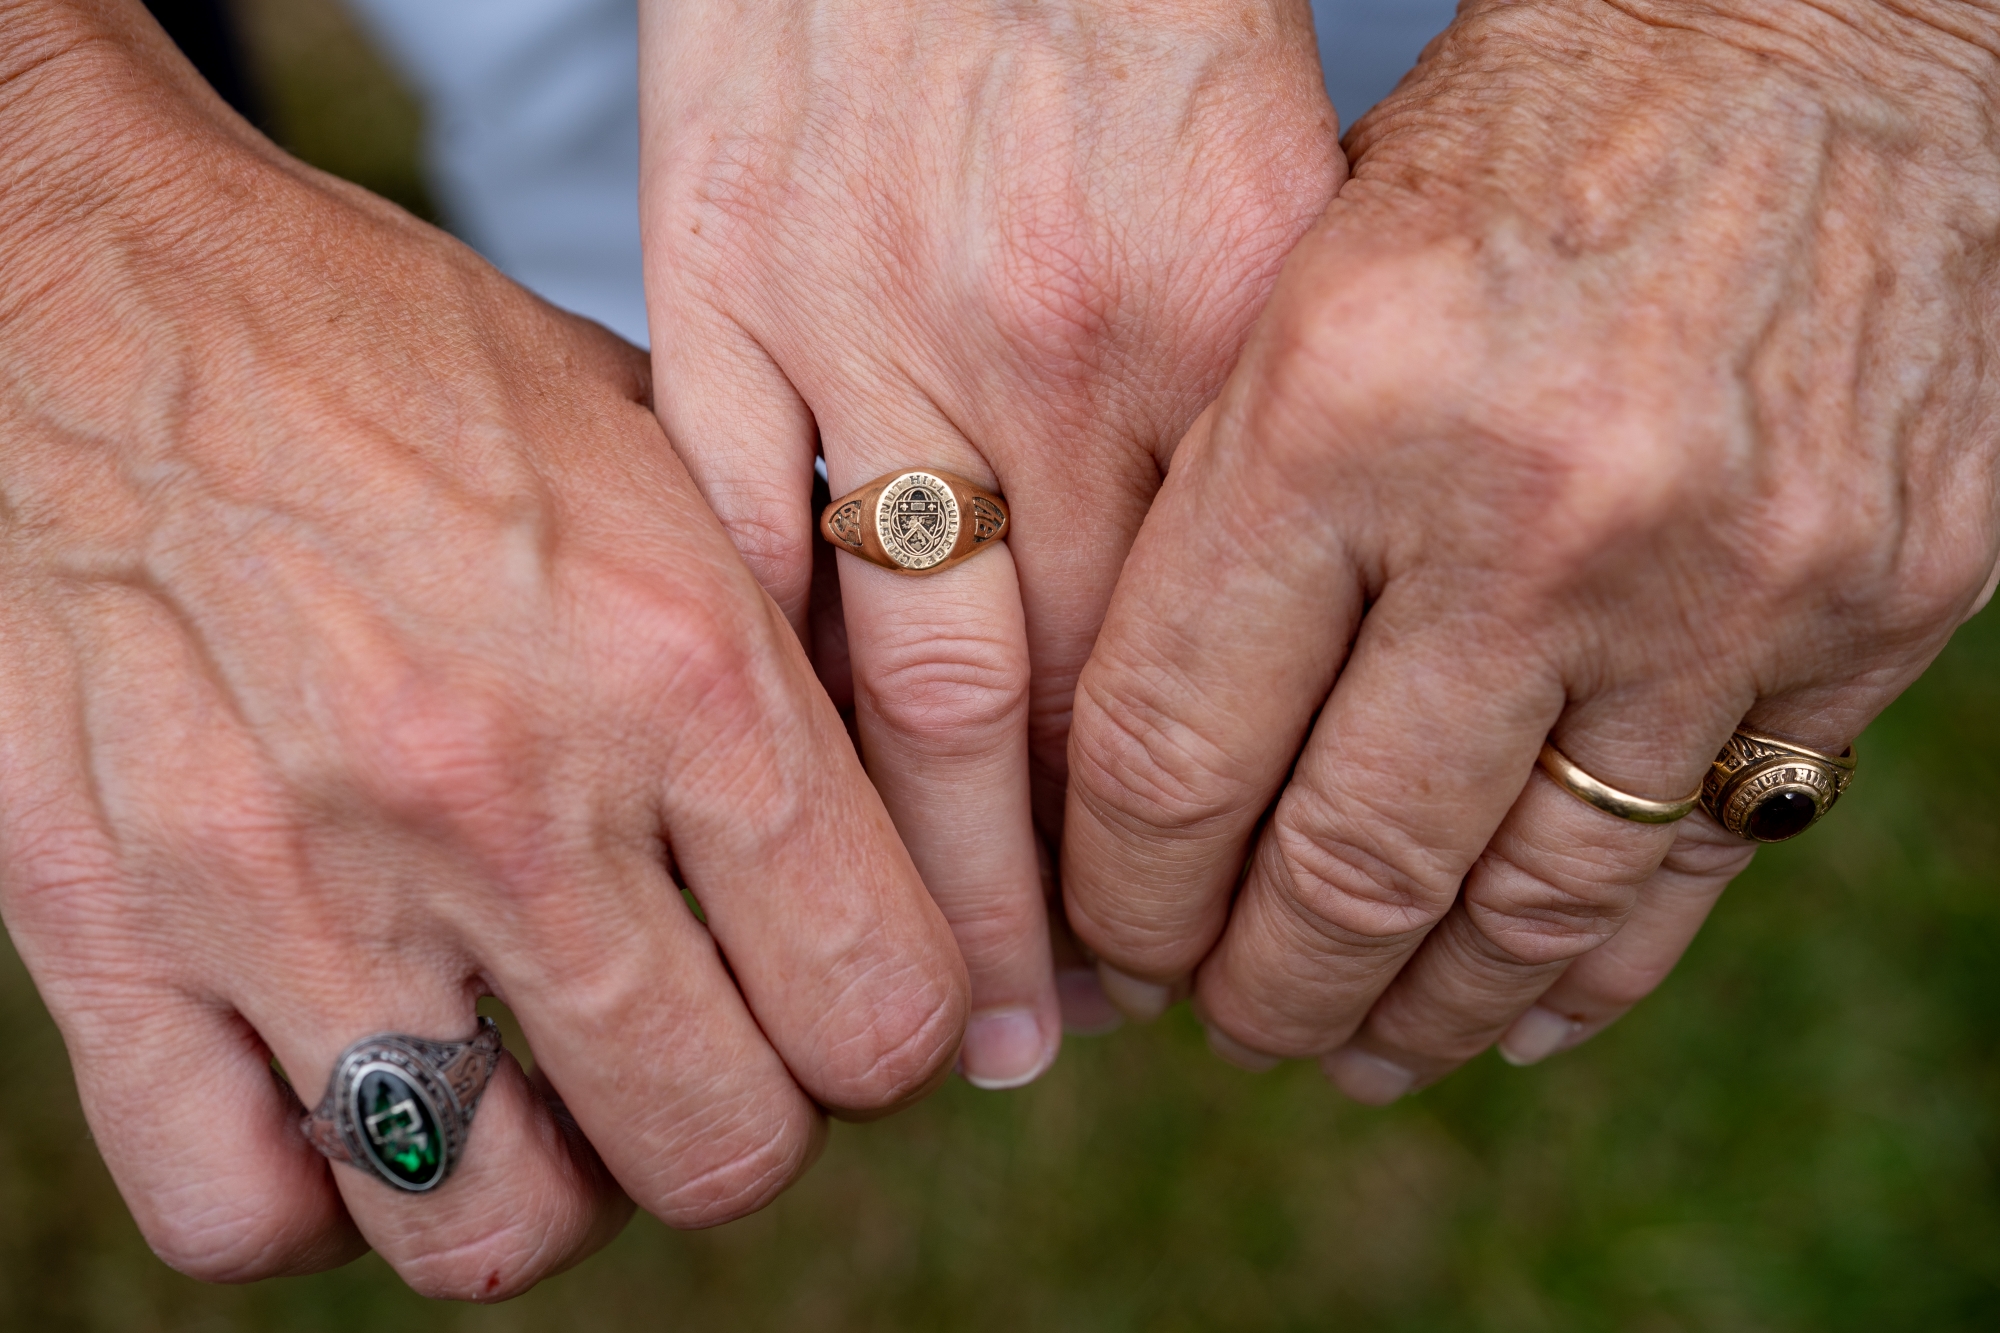 Three variations of Chestnut Hill College rings were on display as Jodie, Joan, and Julie gathered to reminiscence on campus.